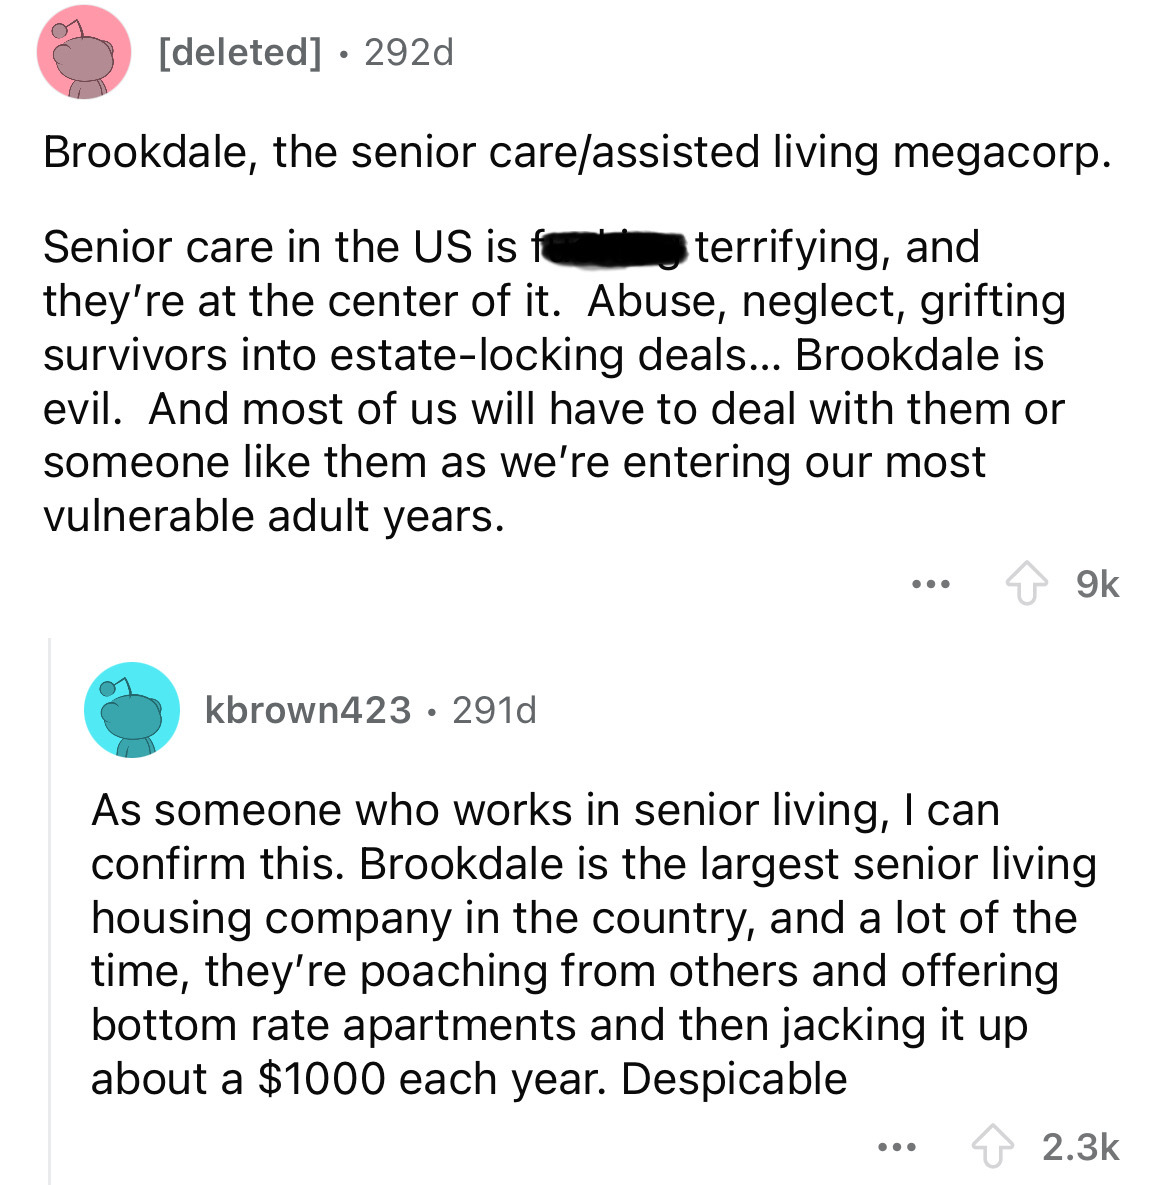 screenshot - deleted 292d . Brookdale, the senior careassisted living megacorp. Senior care in the Us is f terrifying, and they're at the center of it. Abuse, neglect, grifting survivors into estatelocking deals... Brookdale is evil. And most of us will h